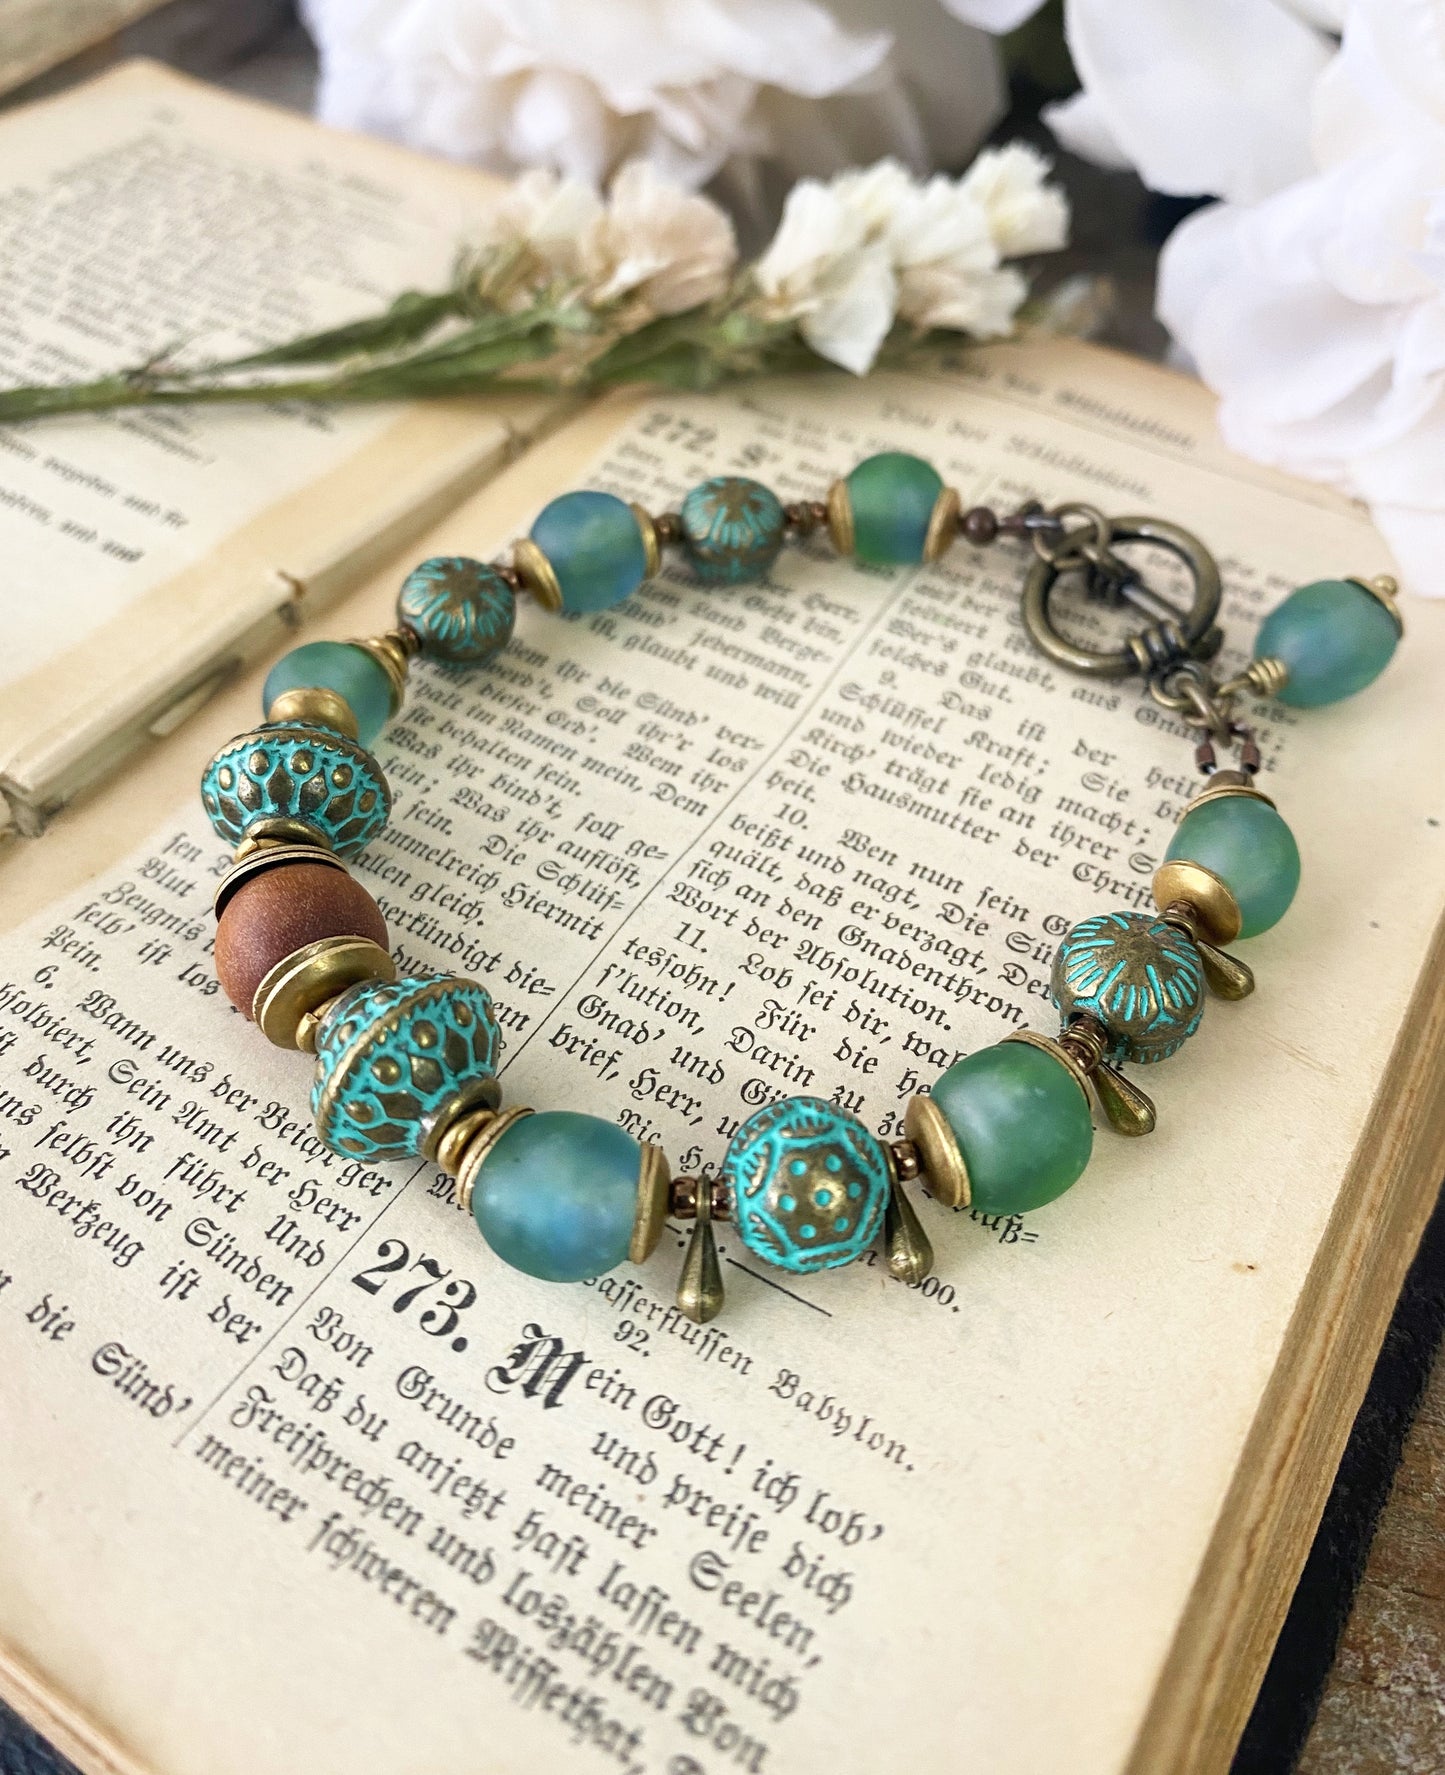 African recycled glass, green patina beads, African brass, sandalwood, bracelet.